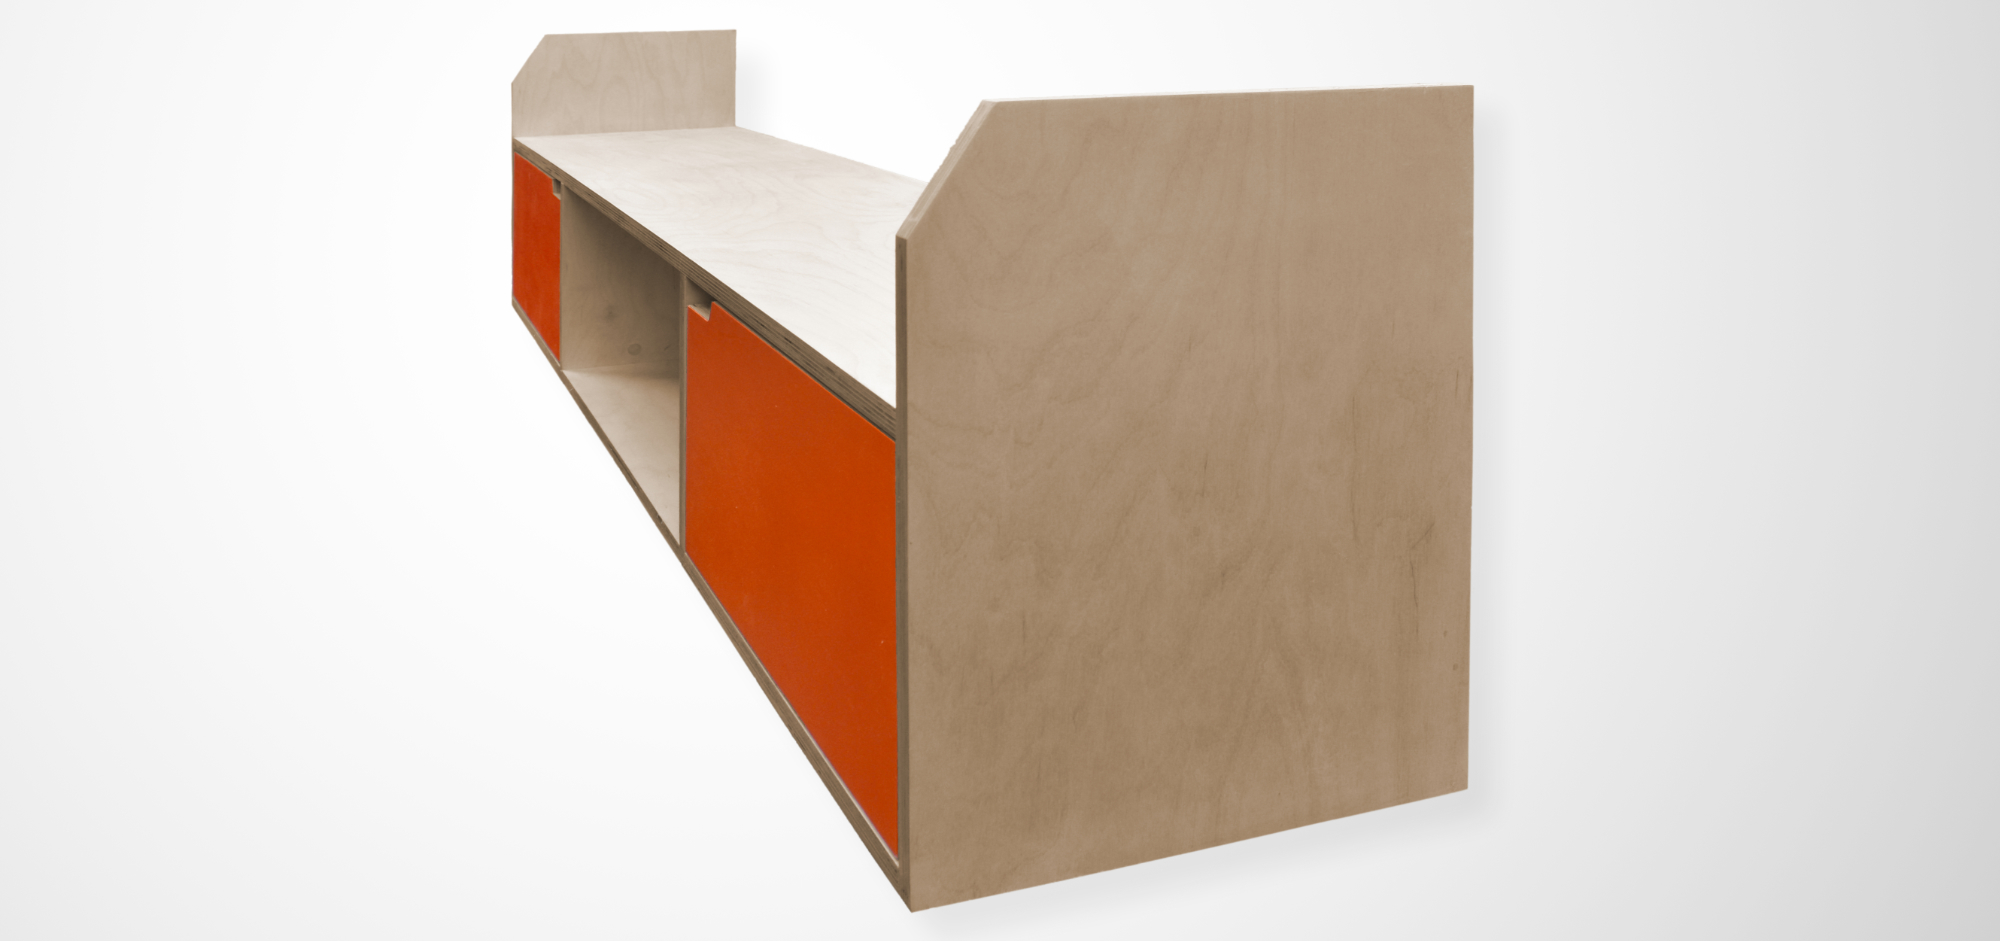 Mmh Furniture 'Horizontal' cabinet birch plywood right hand side view